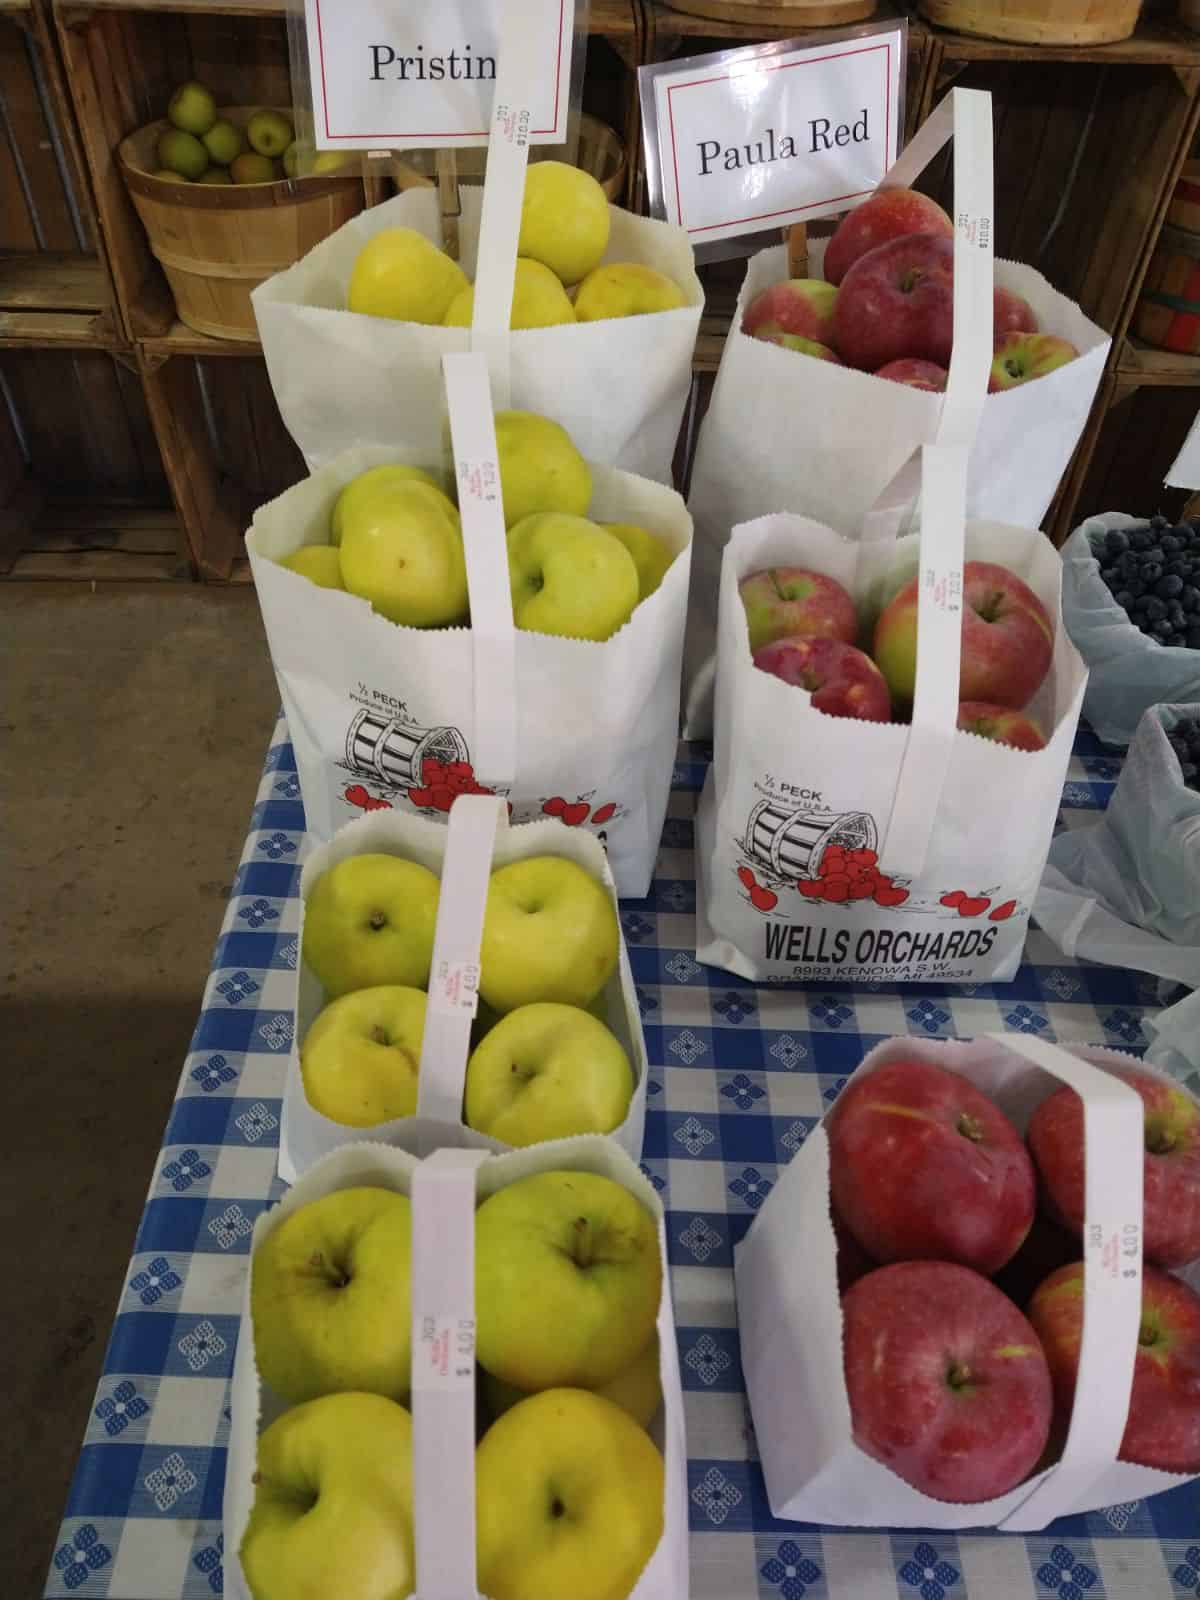 Bags of Pristine and Paula Red apples at Wells Orchards in Grand Rapids, Michigan.